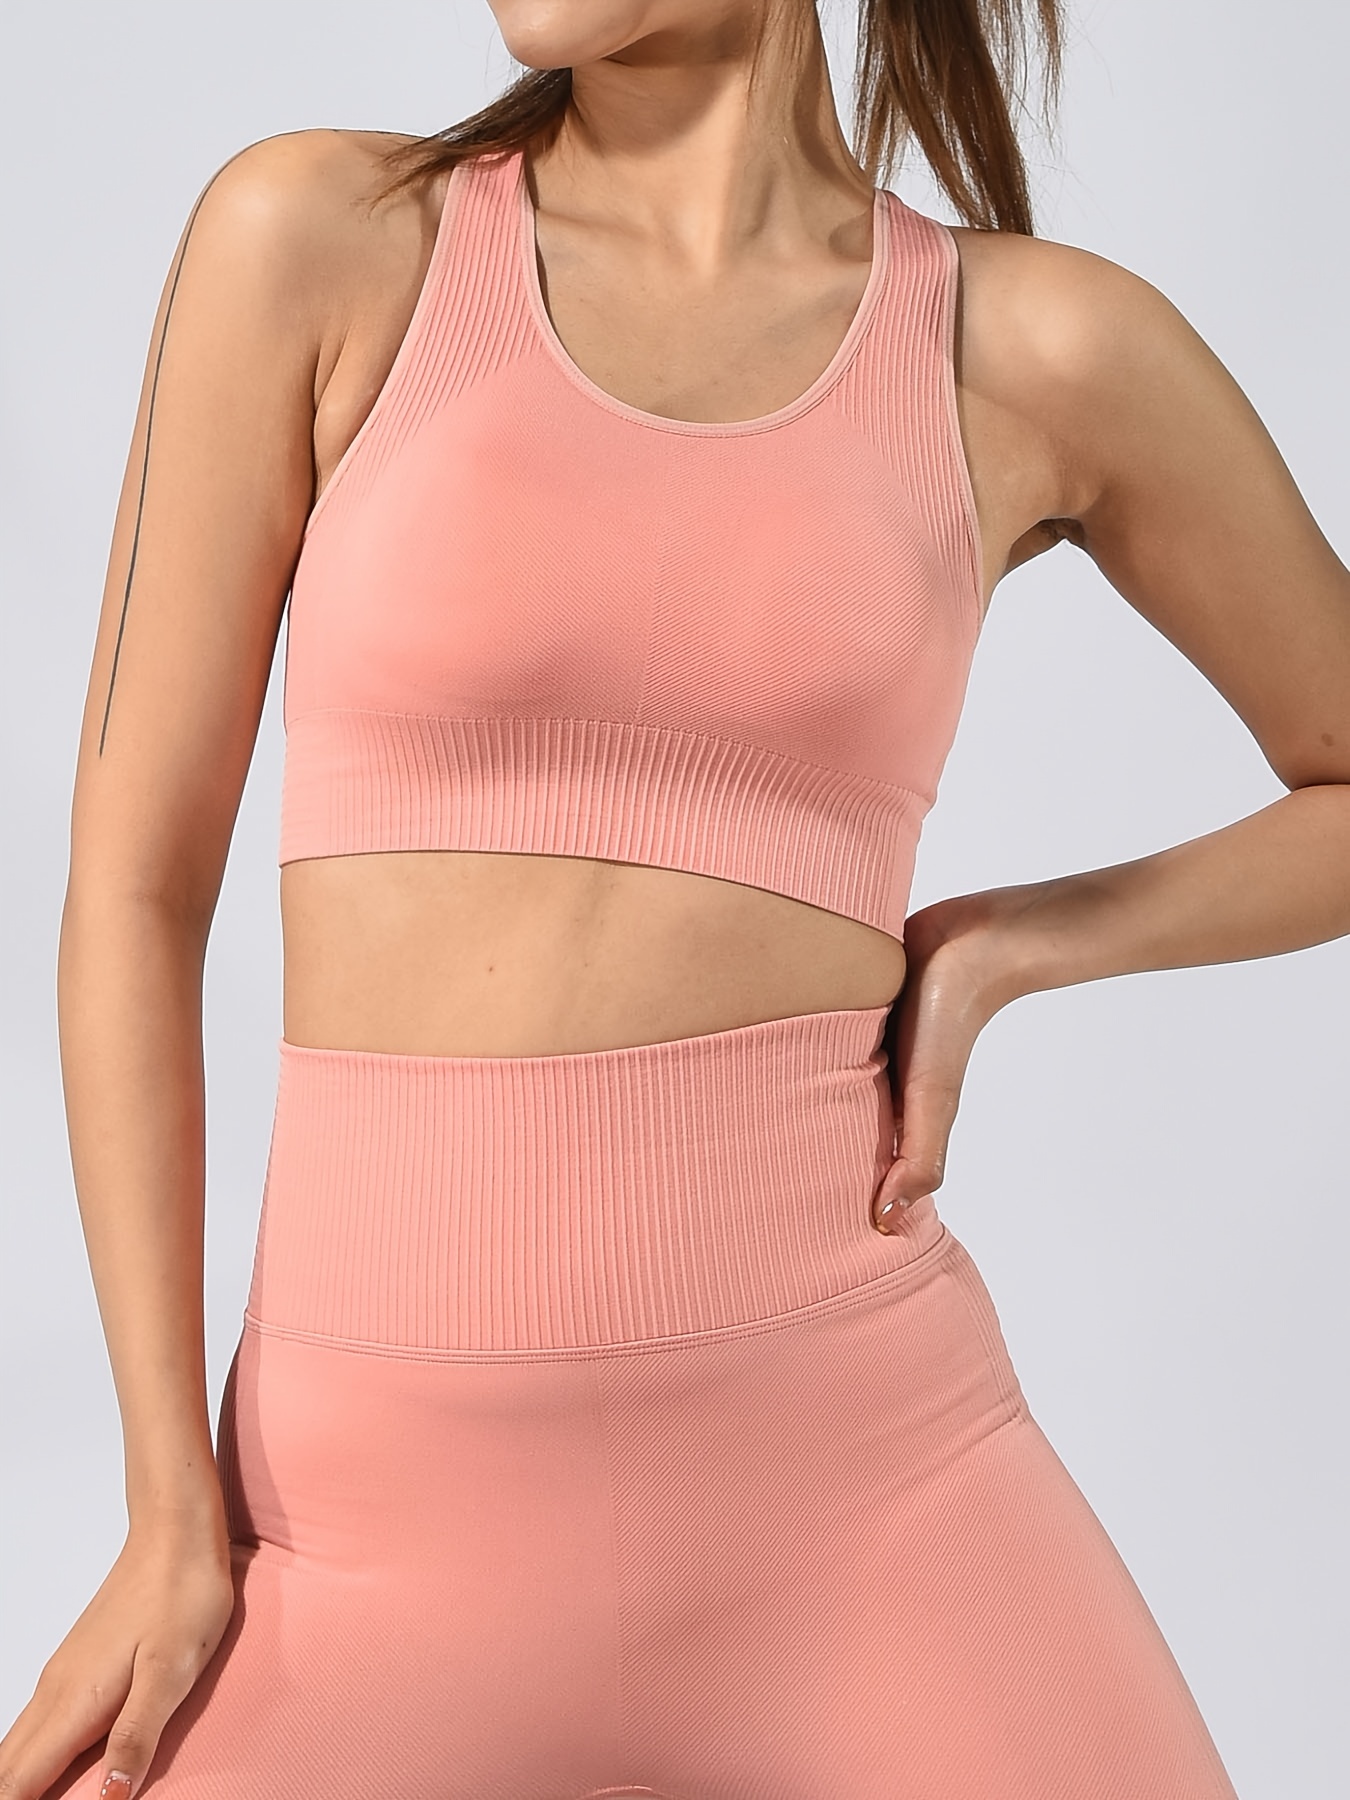 Comfortable and Supportive Double Strap Sports Bra with Seamless Design and  Chest Pad for Women's Running, Yoga, and Activewear